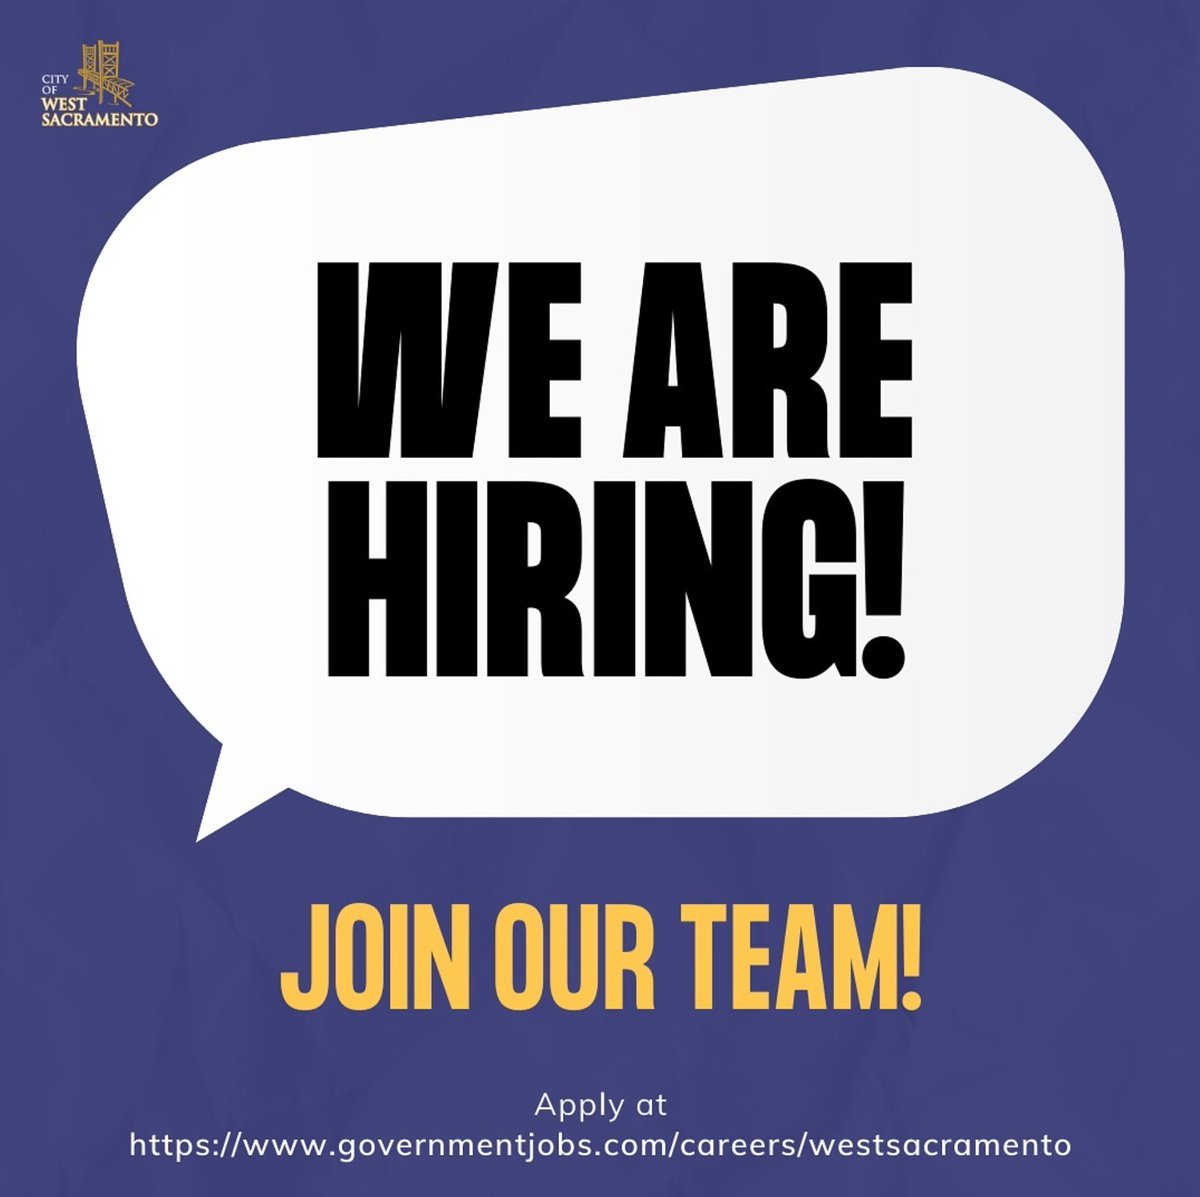 📢 Join the City of West Sacramento team! We’re #hiring for various positions including Recreation Manager, Associate Engineer, and more. Explore exciting opportunities and be part of our dynamic community! Apply at wsac.city/GovernmentJobs. Please share!